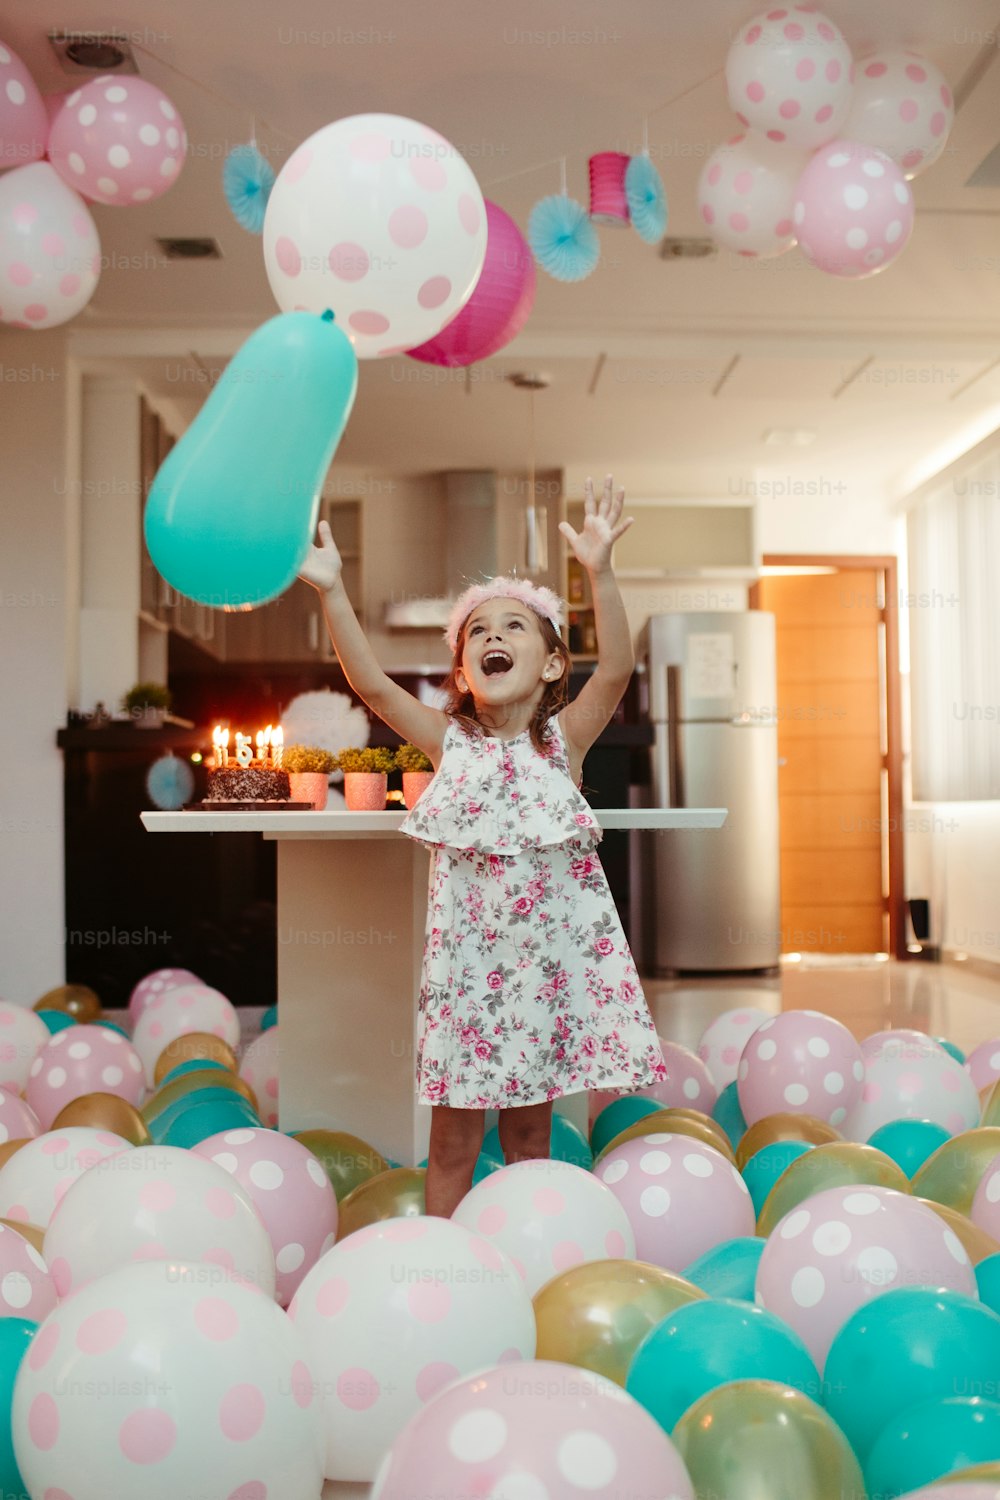 a little girl standing in a room filled with balloons